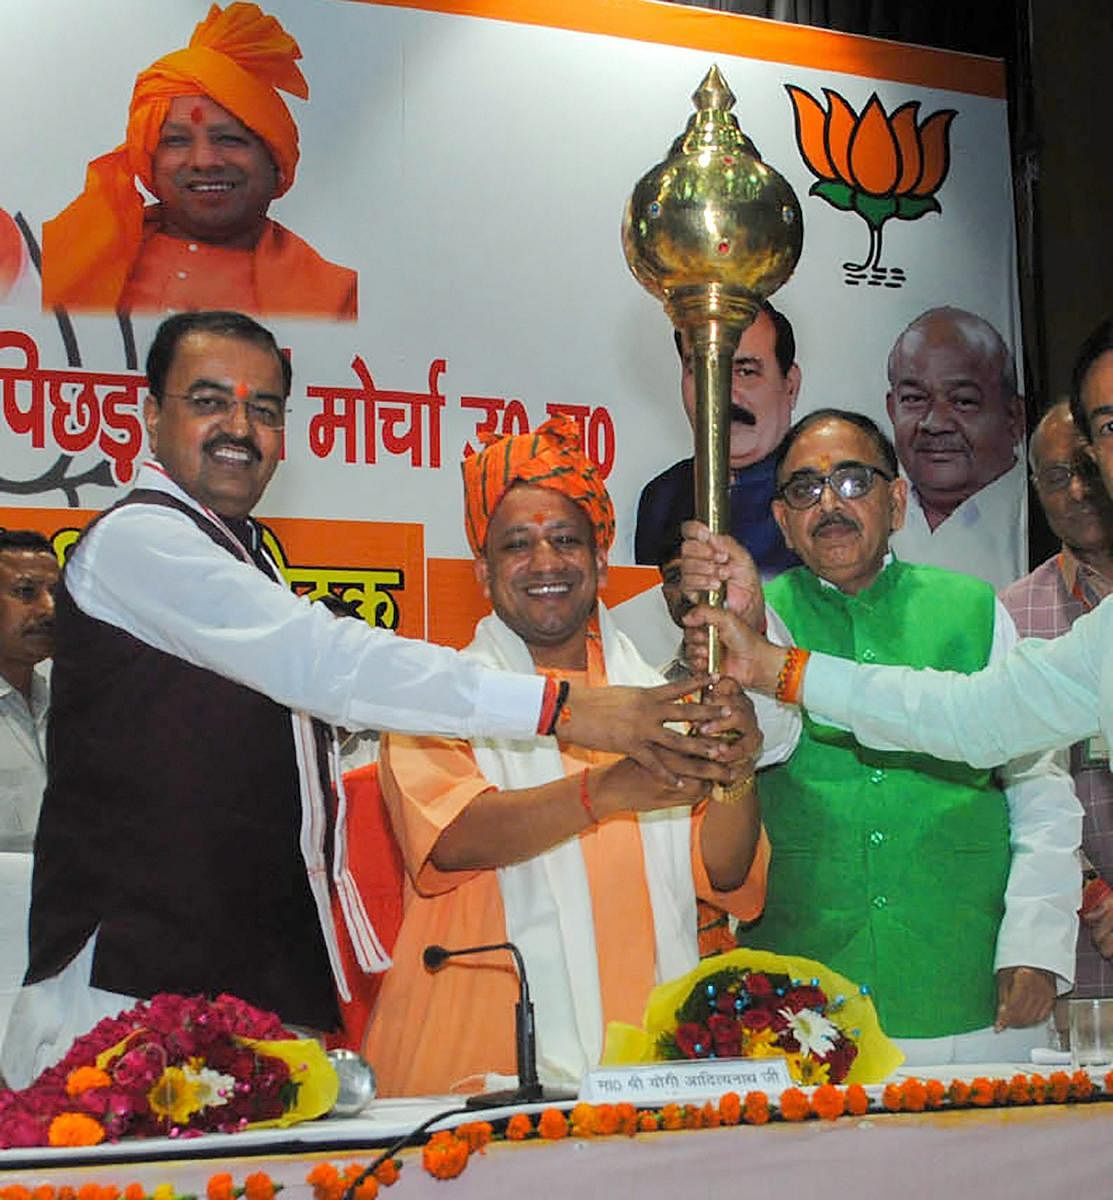 The proposal for the merger was put forth by senior BJP leader and UP Deputy Chief Minister Keshav Prasad Maurya